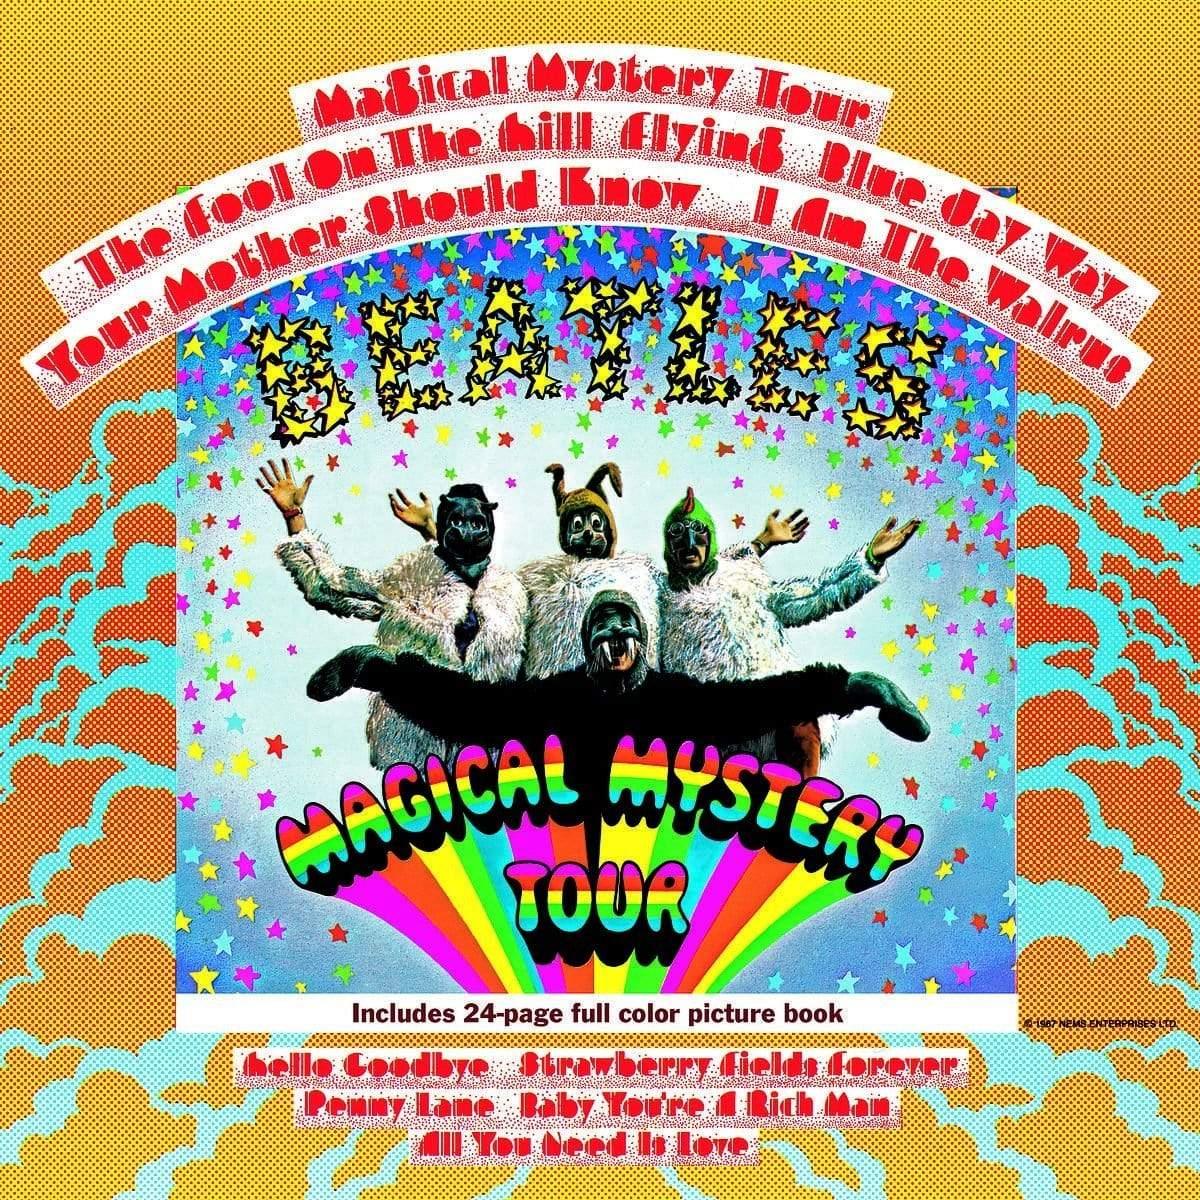 The Beatles - Magical Mystery Tour (Limited, Remastered, 180 Gram) (LP) - Joco Records